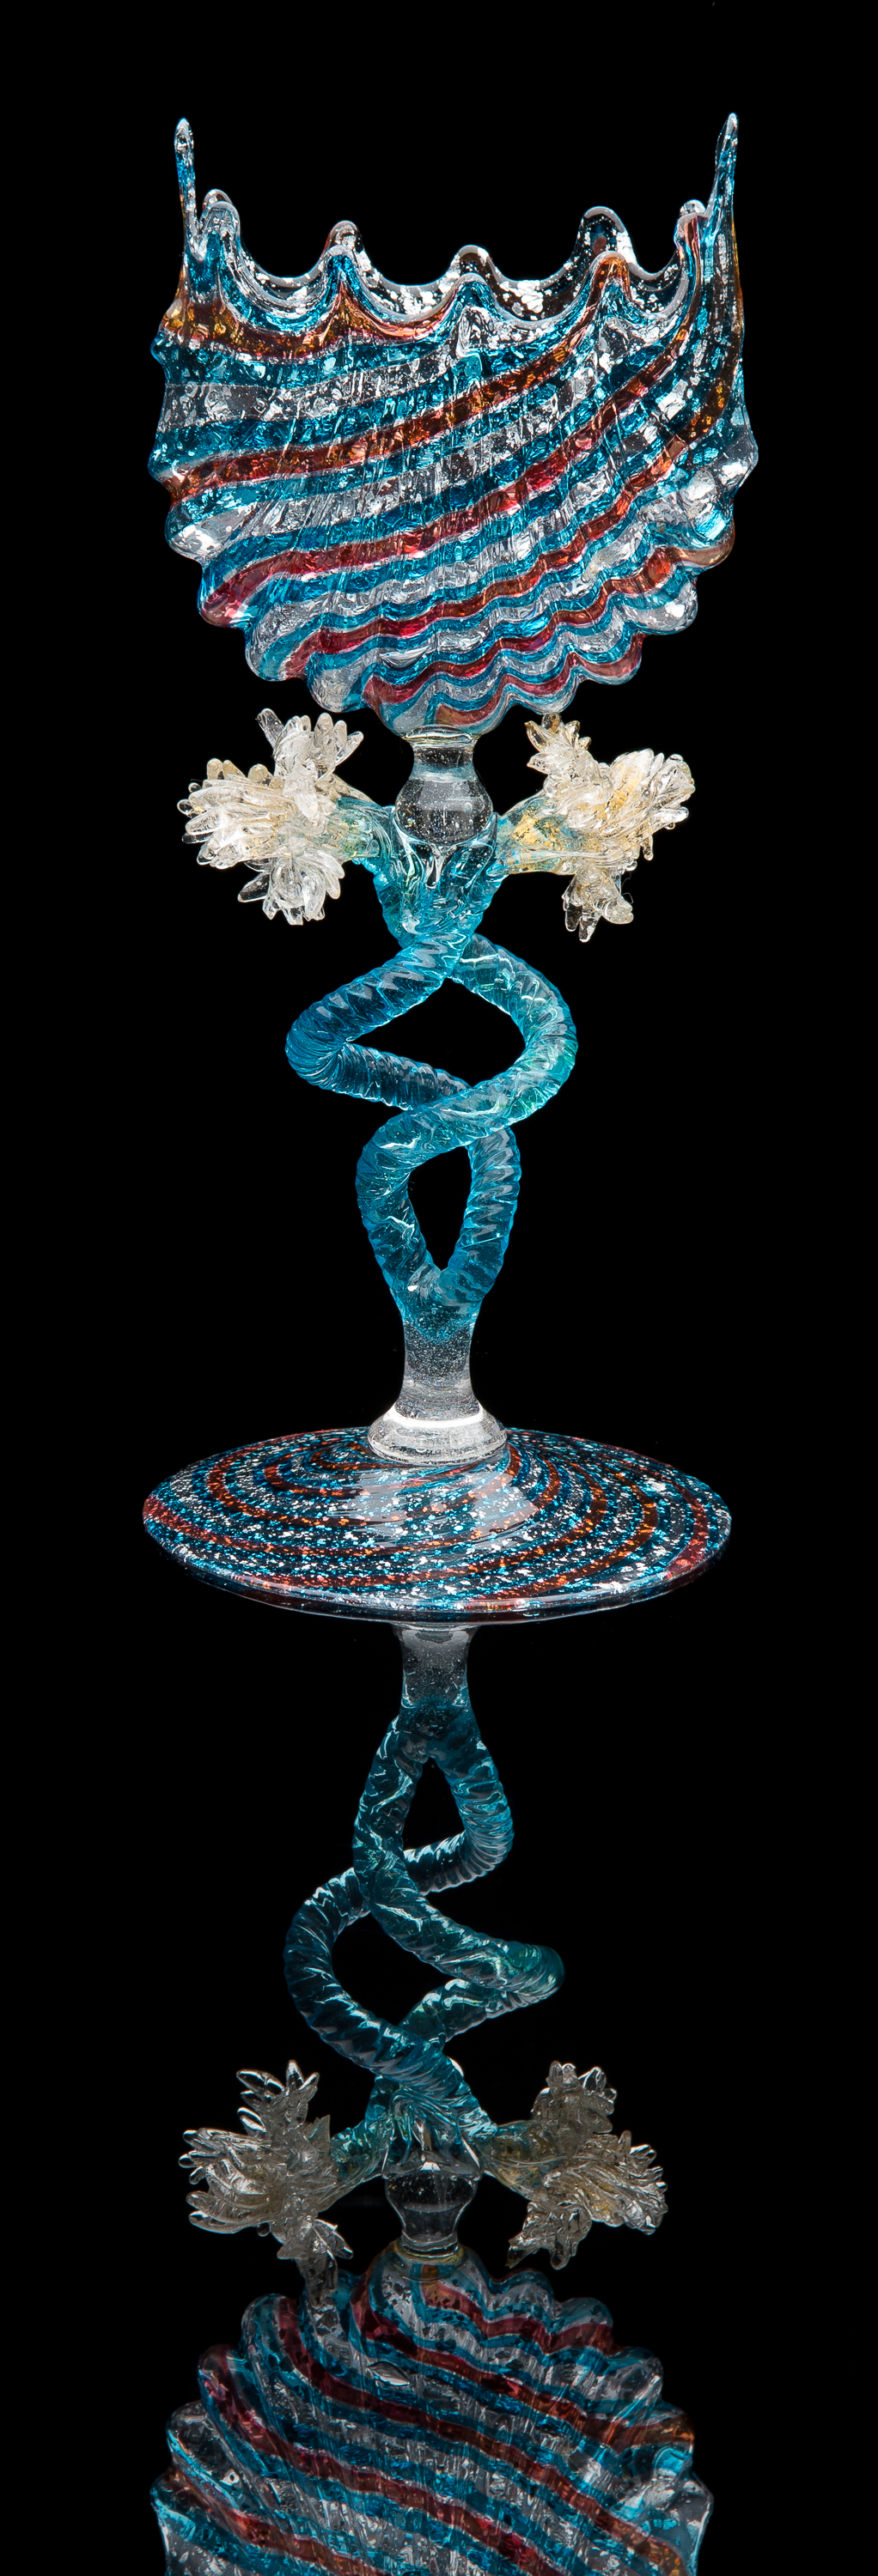  Fratelli Toso,  Large Shell Taza with Ruby and Blue Cane Decoration  (1885, glass, 8.75 inches), VV.1105 